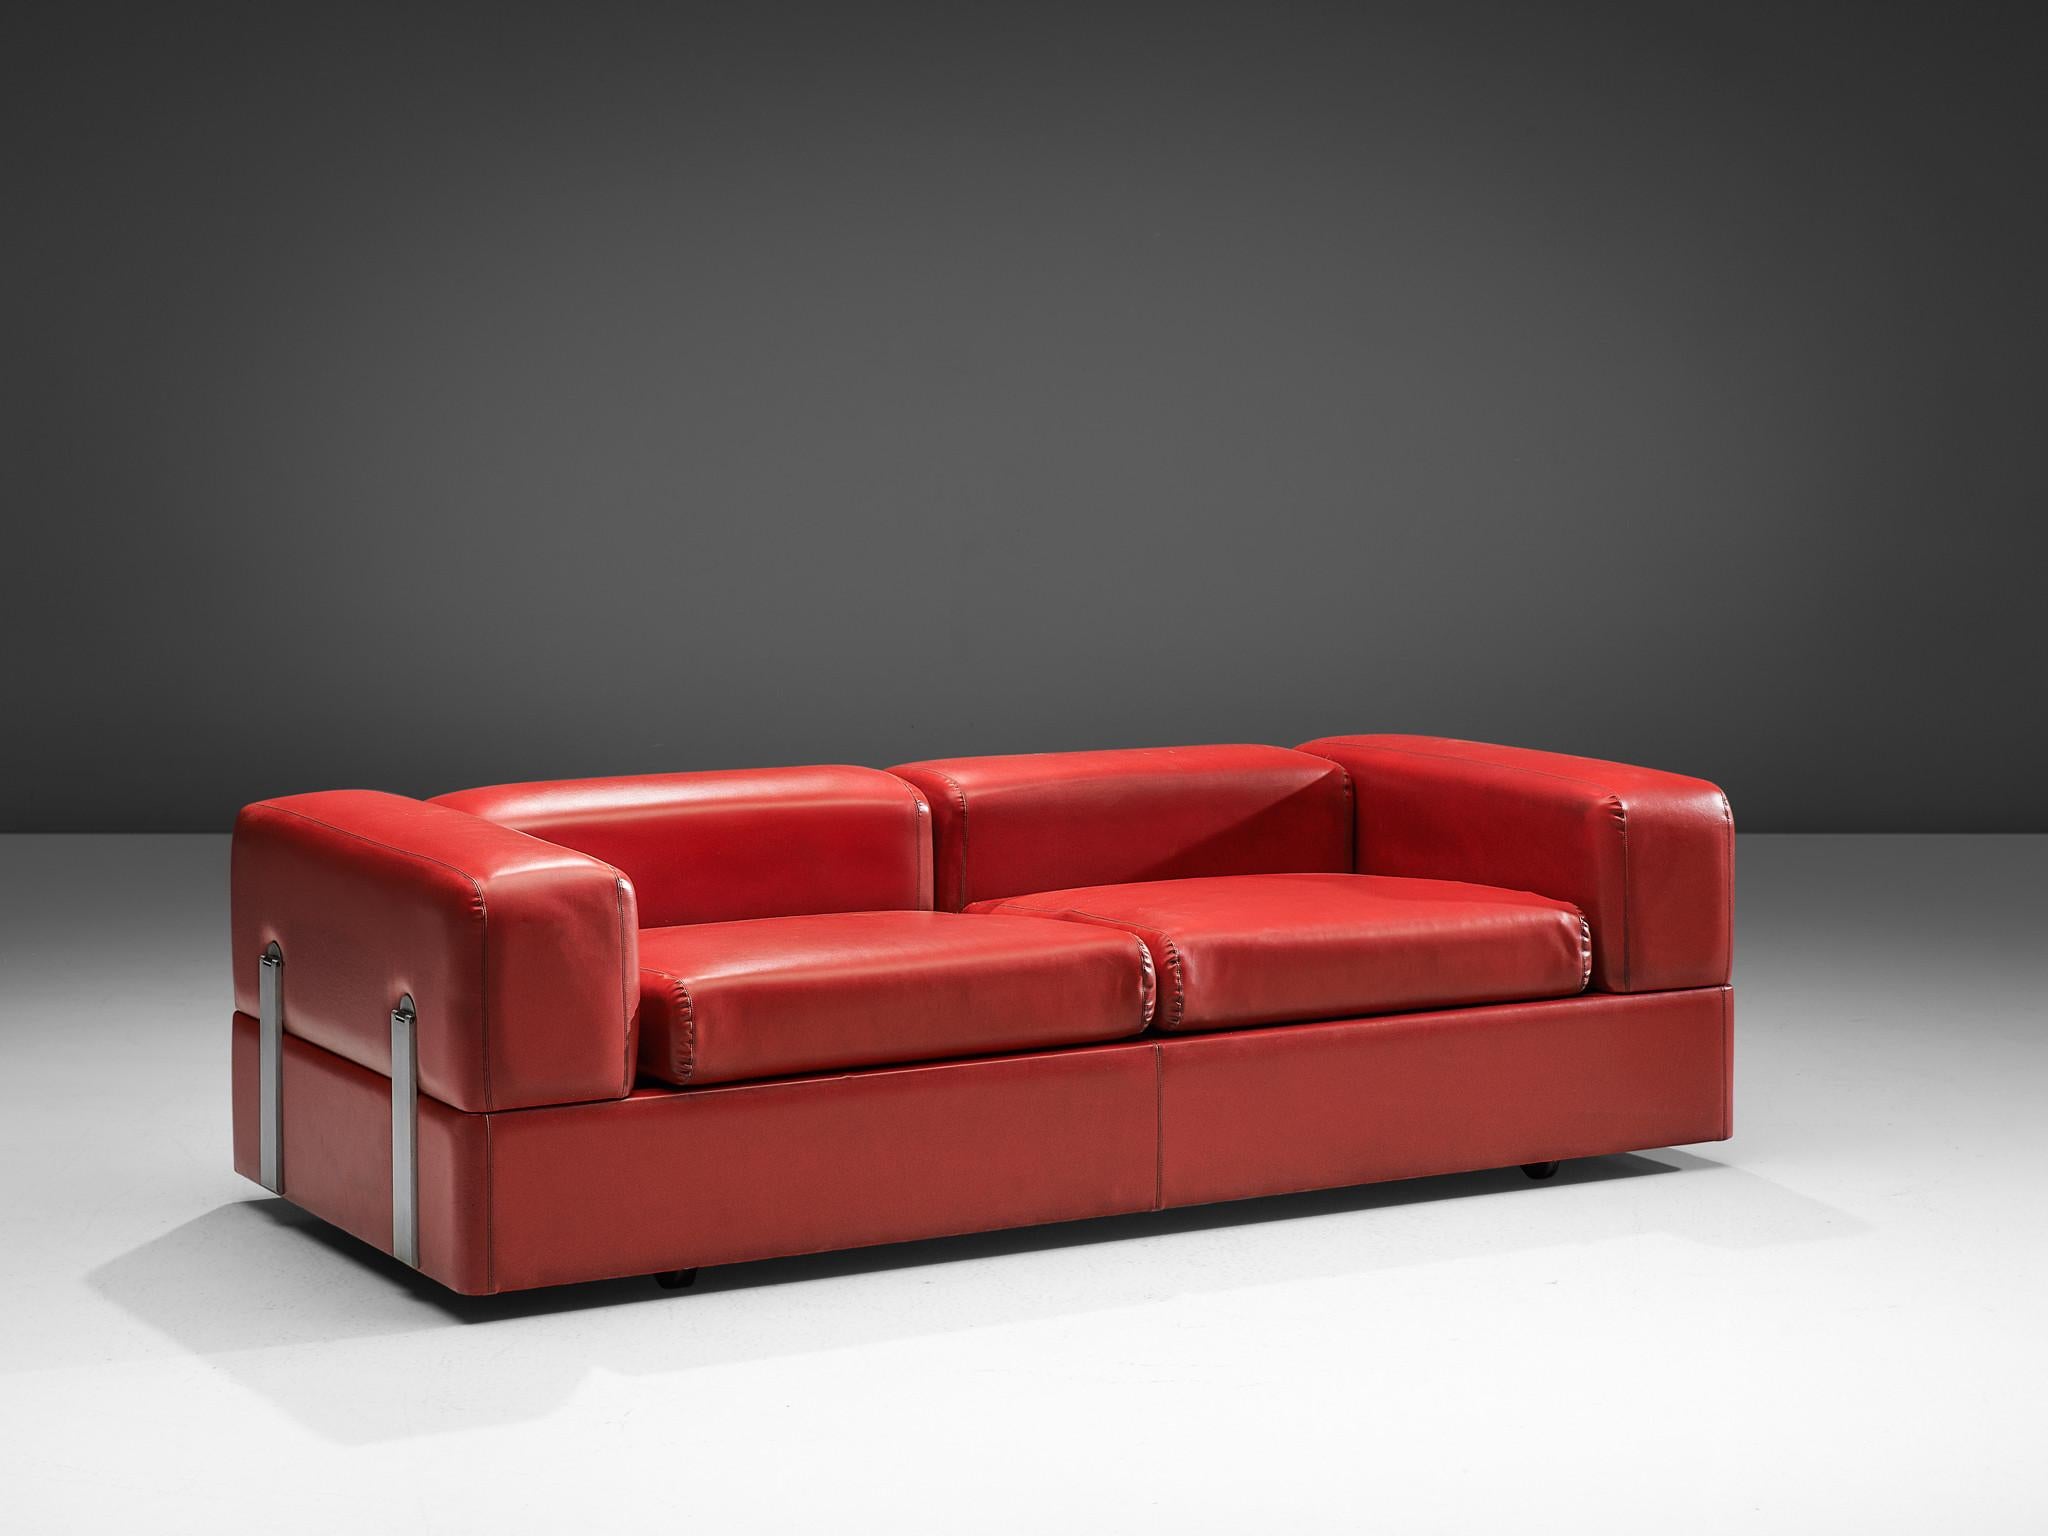 Tito Agnoli for Cinova, sofa or daybed model 711, red leatherette, steel, laminated wood, Italy, 1968.

Cubic sofa that can be transformed into a daybed by Italian designer Tito Agnoli for Cinova. The steel frame displays an exquisite composition of